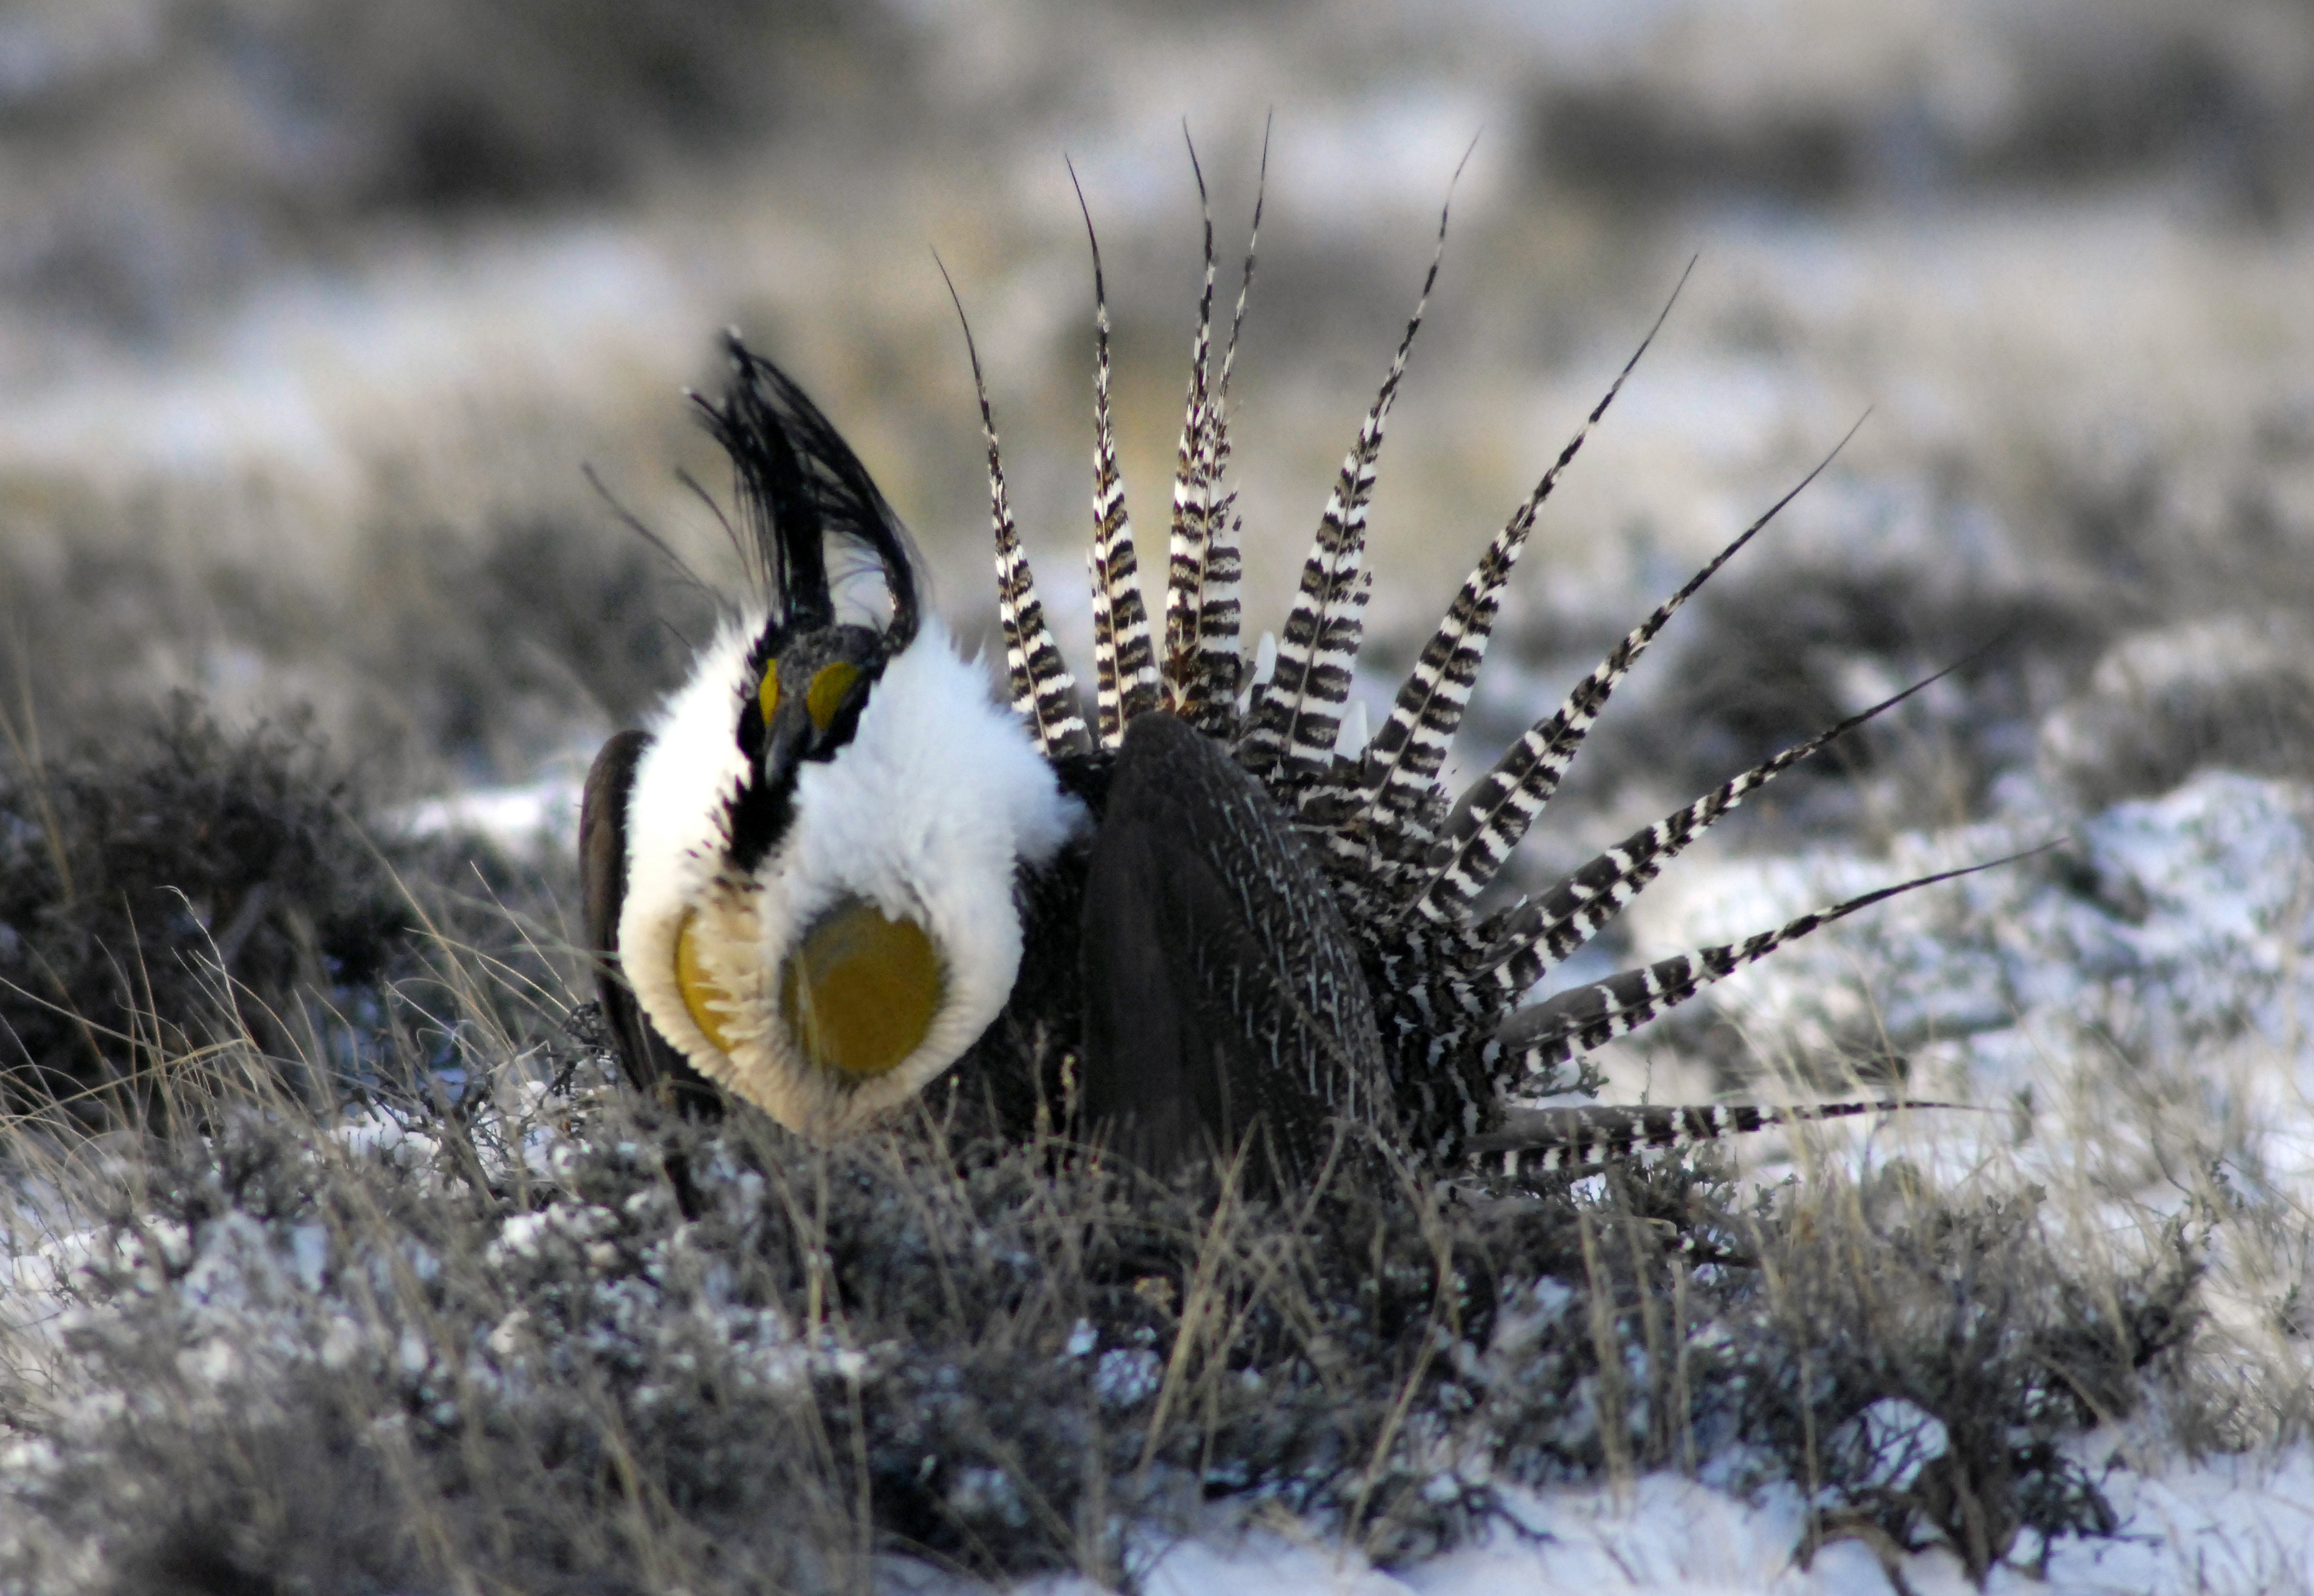 During the March to May mating season, Gunnison Sage Grouse males display their plumes bulging air sacs, white breasts and spiky tail feathers. (Helen H. Richardson—Denver Post via Getty Images)